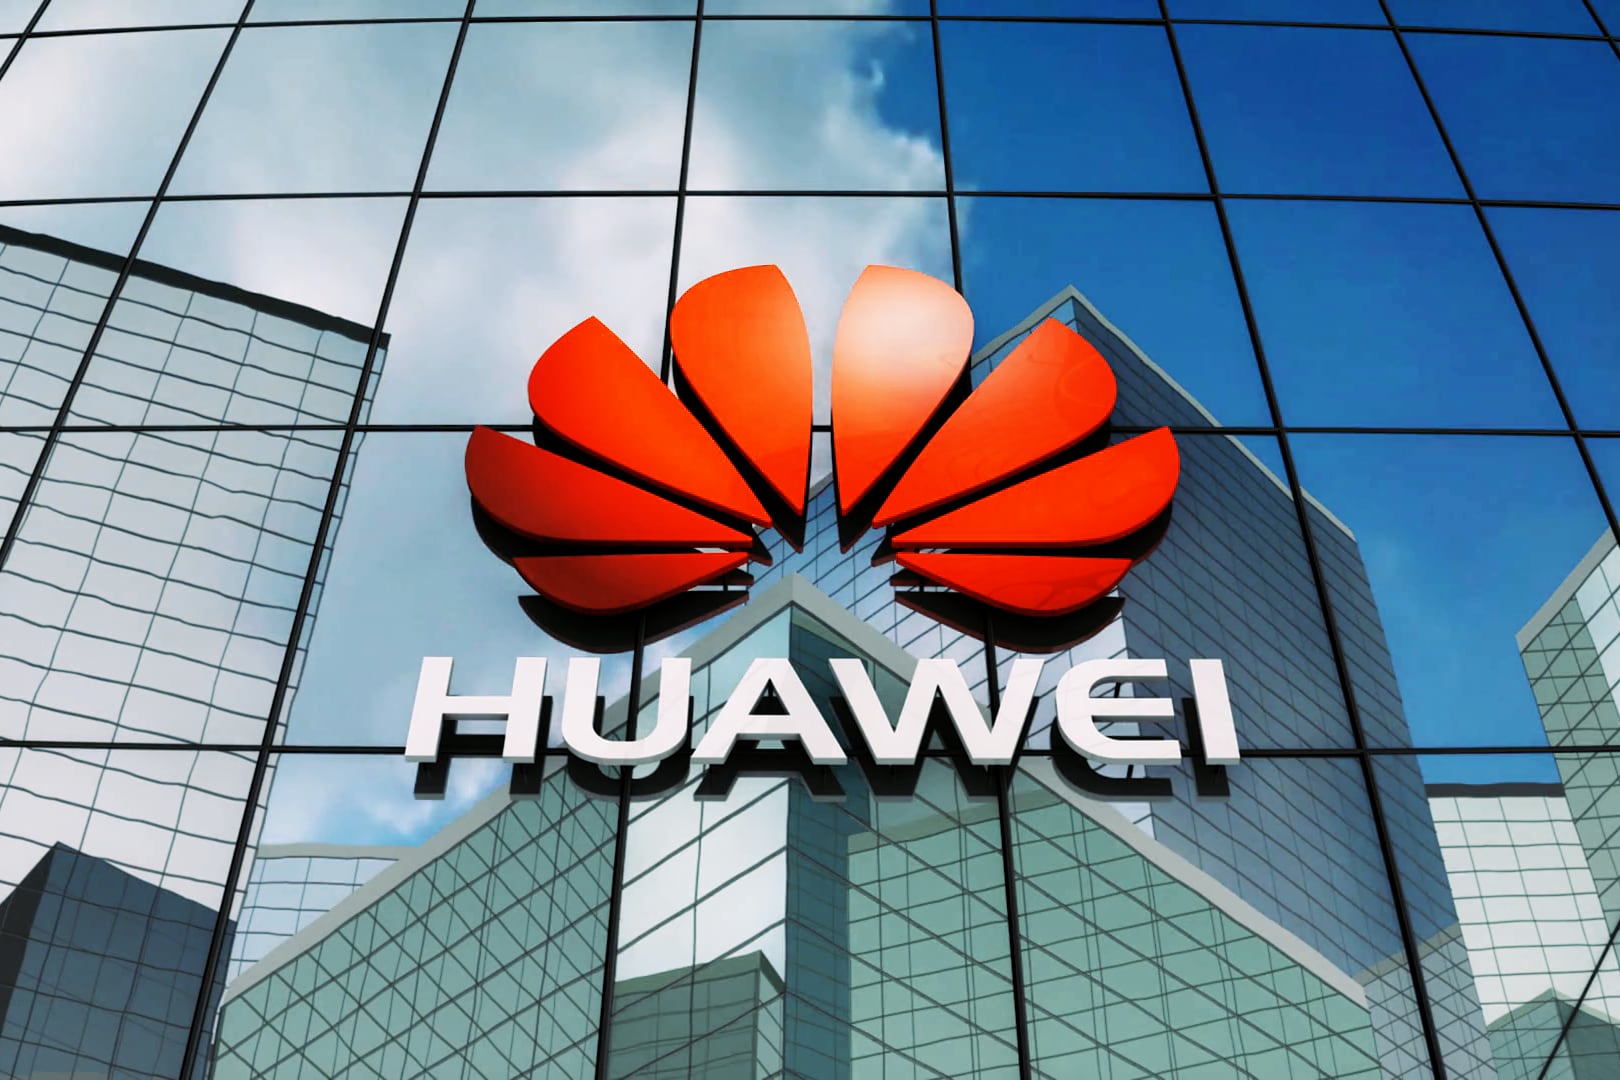 Huawei has had to replace 13,000 parts in its gadgets because of US sanctions